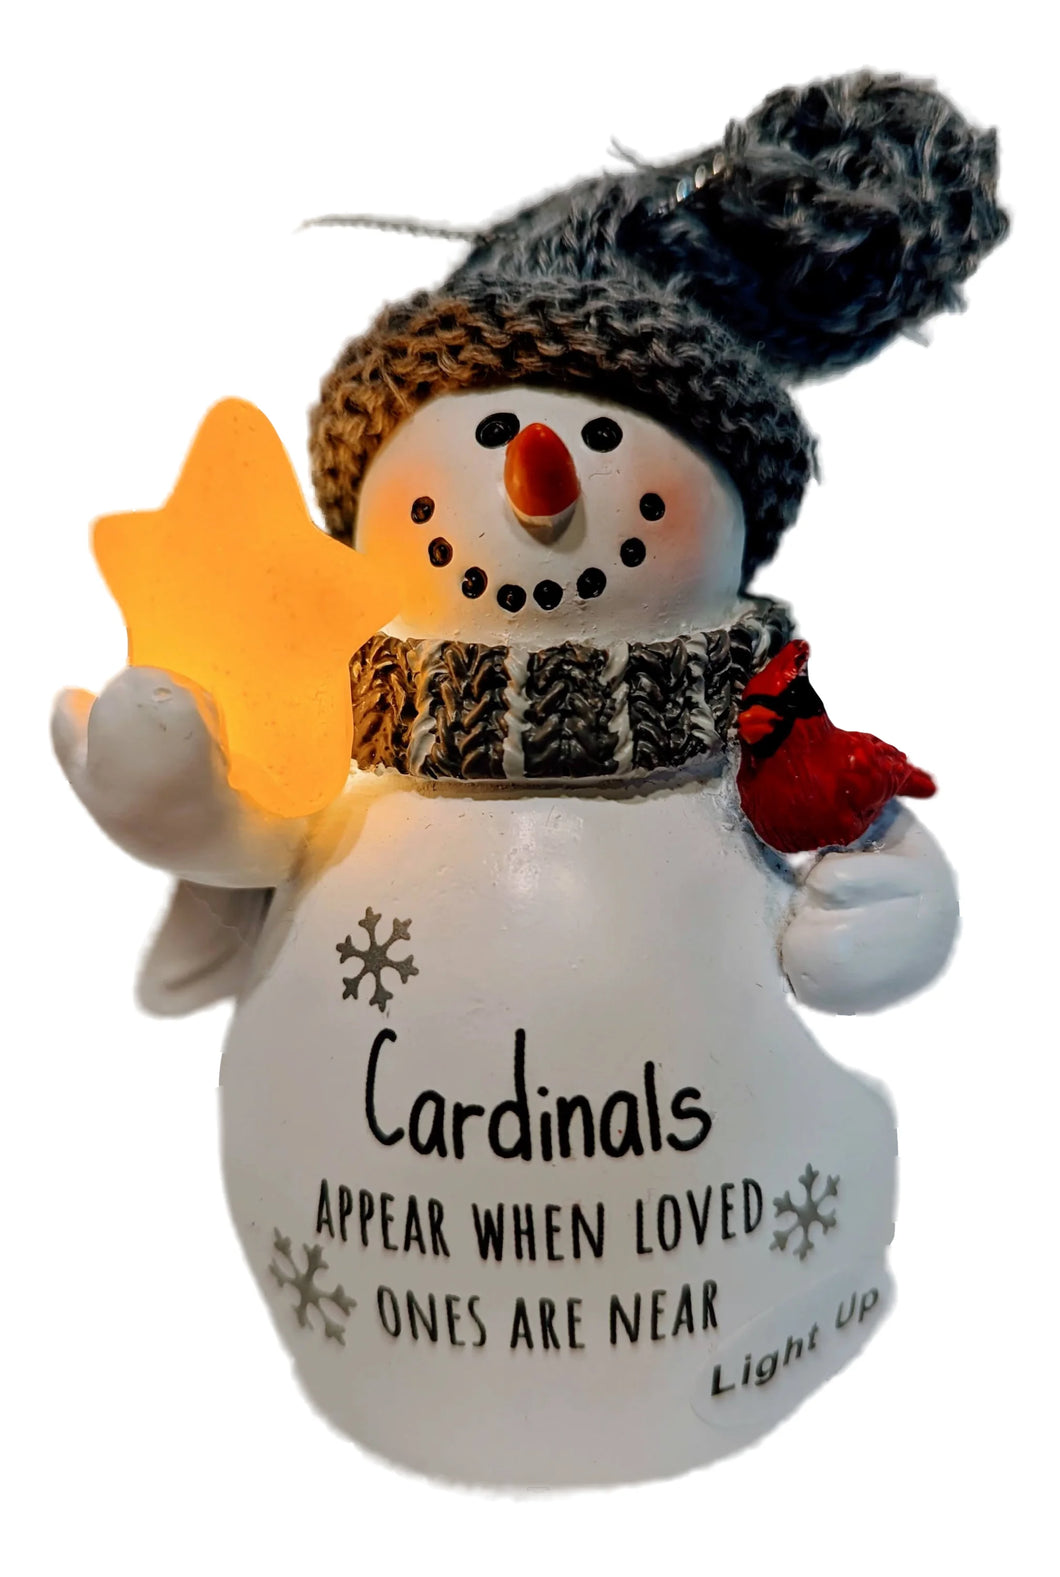 Snowman Angel Ornament Holding Light Up Star - Cardinals Appear When Loved Ones are Near